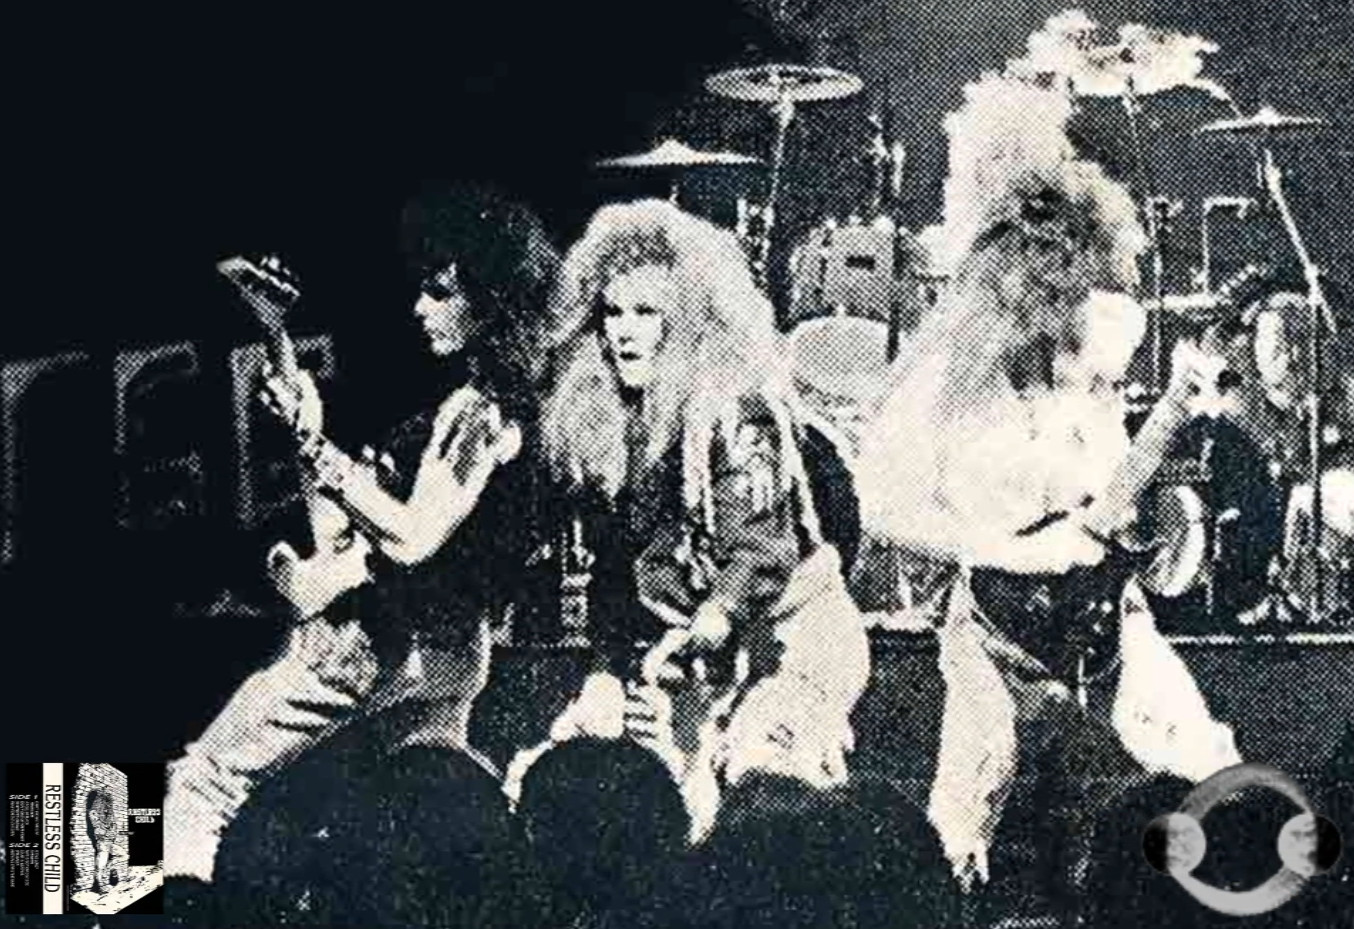 Image of Restless Child performing Dreamer on stage in 1989. 